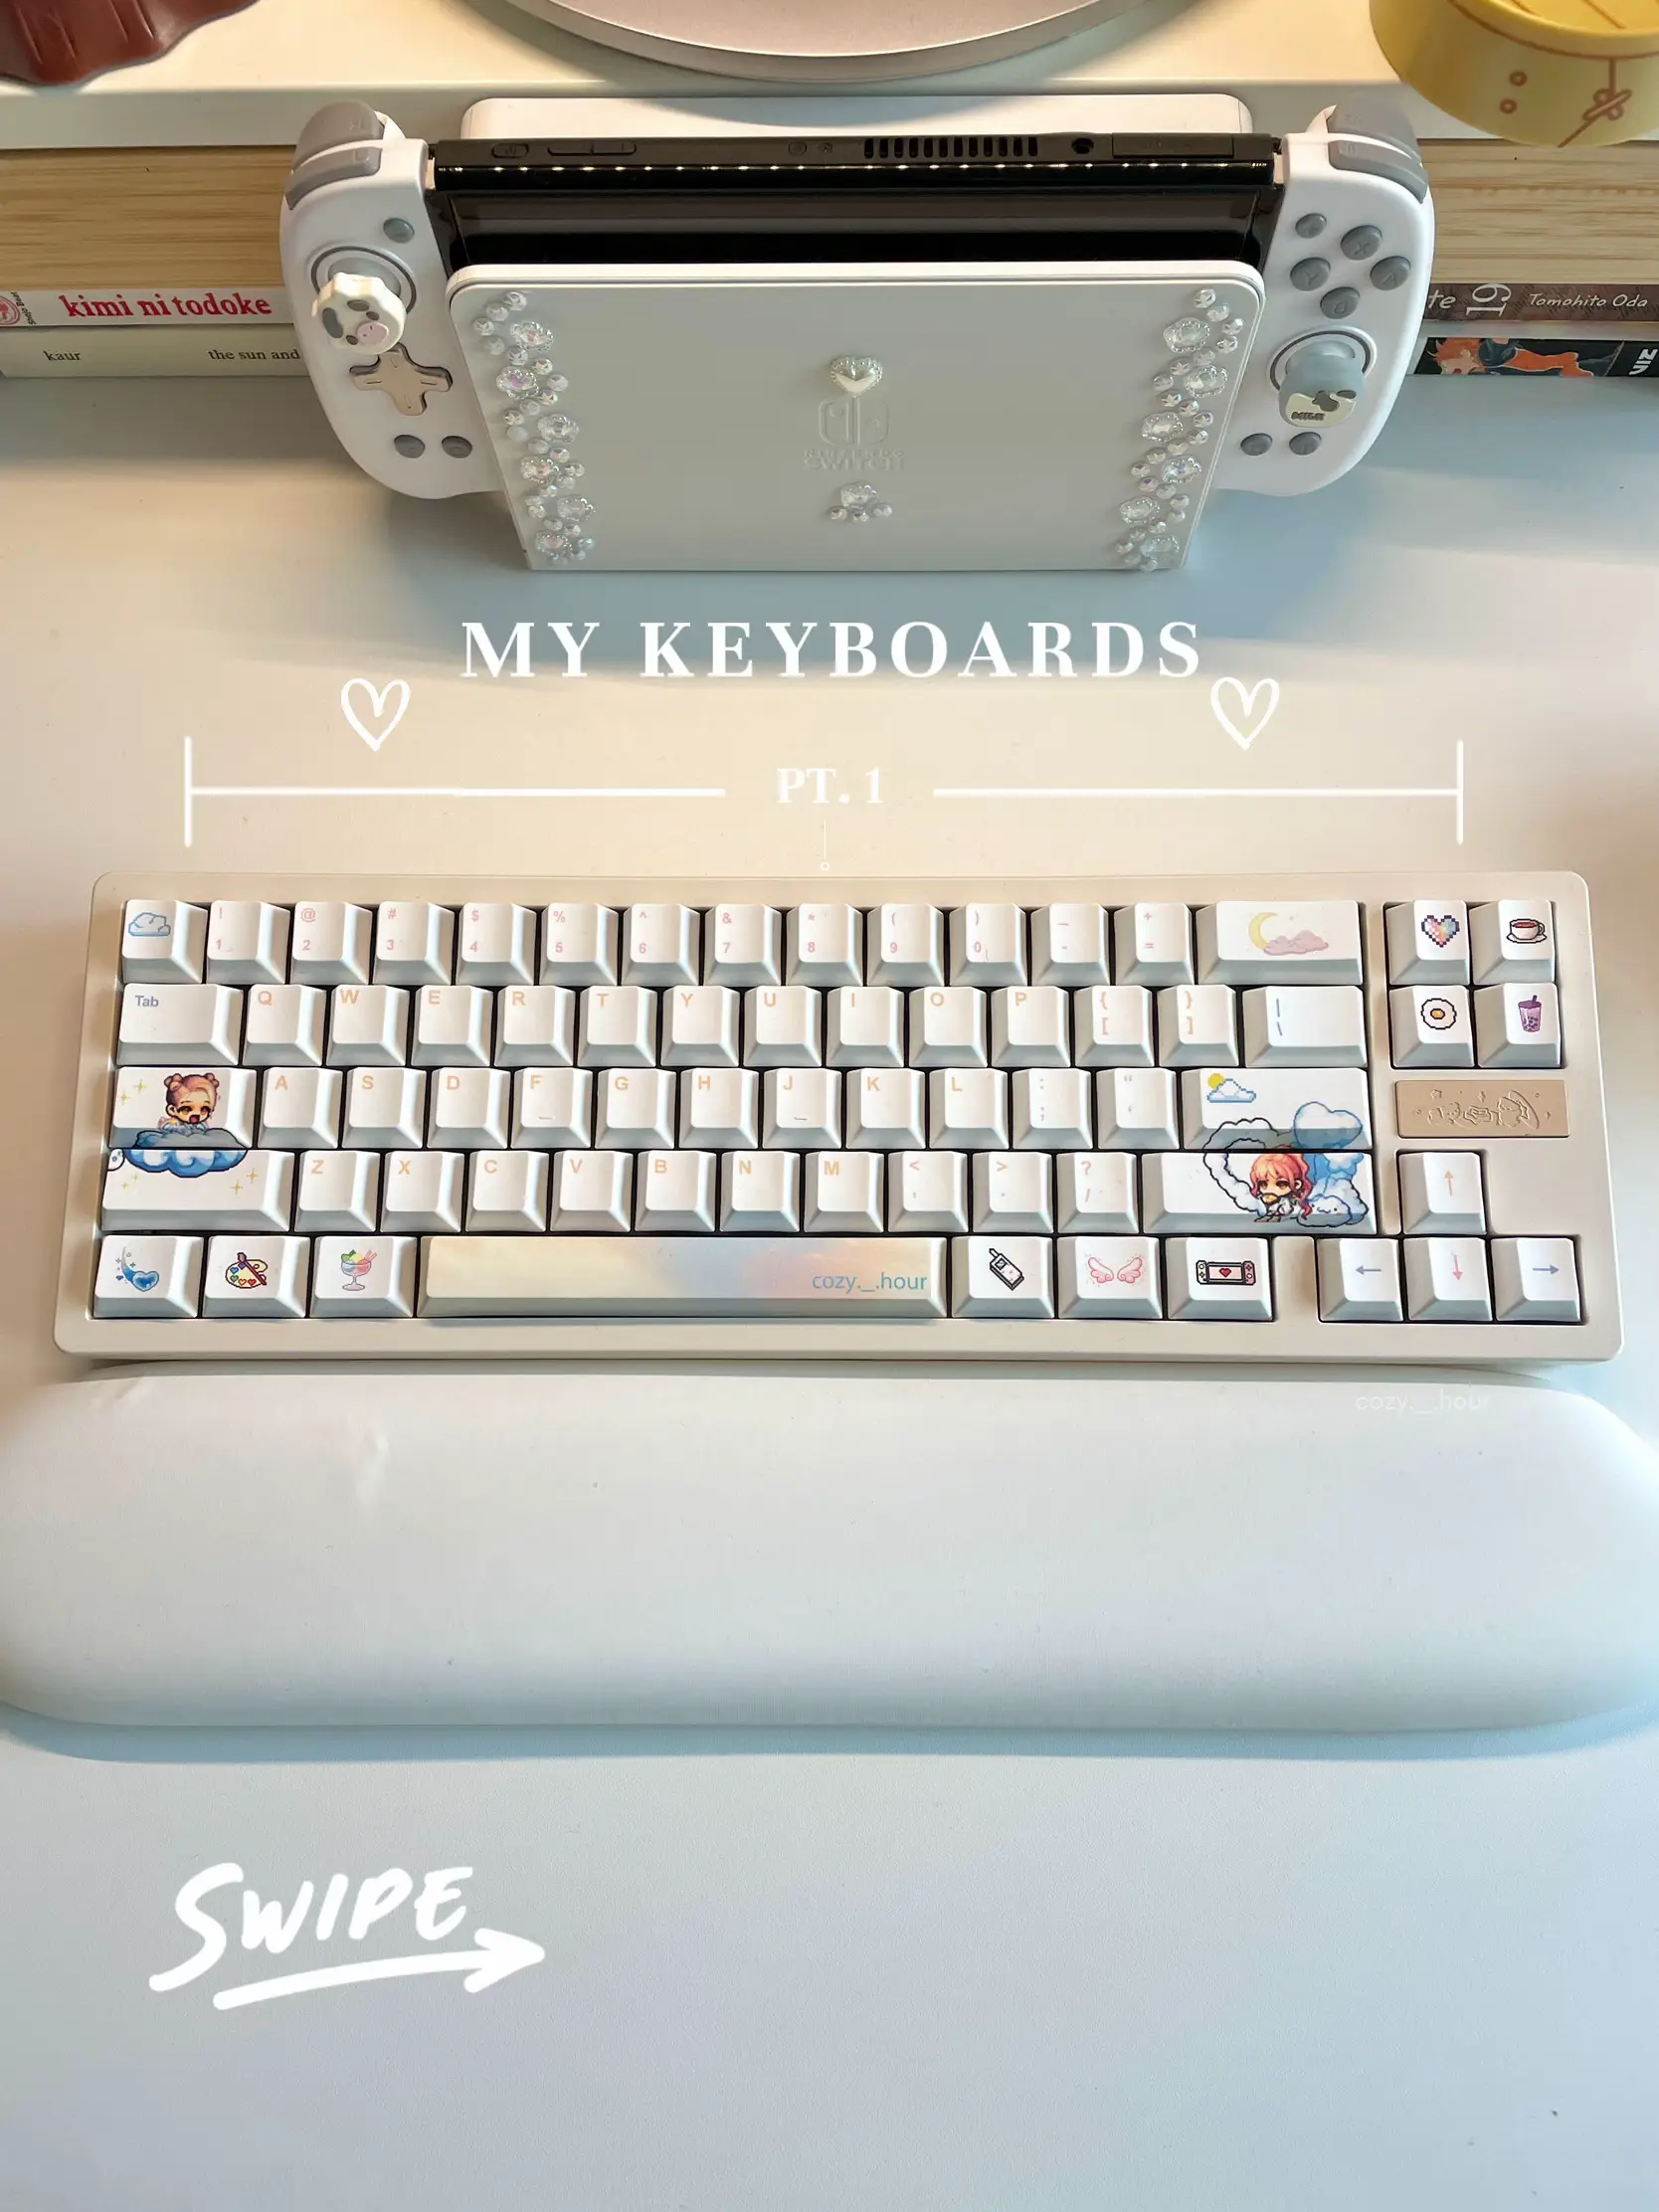 Complete your workspace with custom keycaps – Goblintechkeys